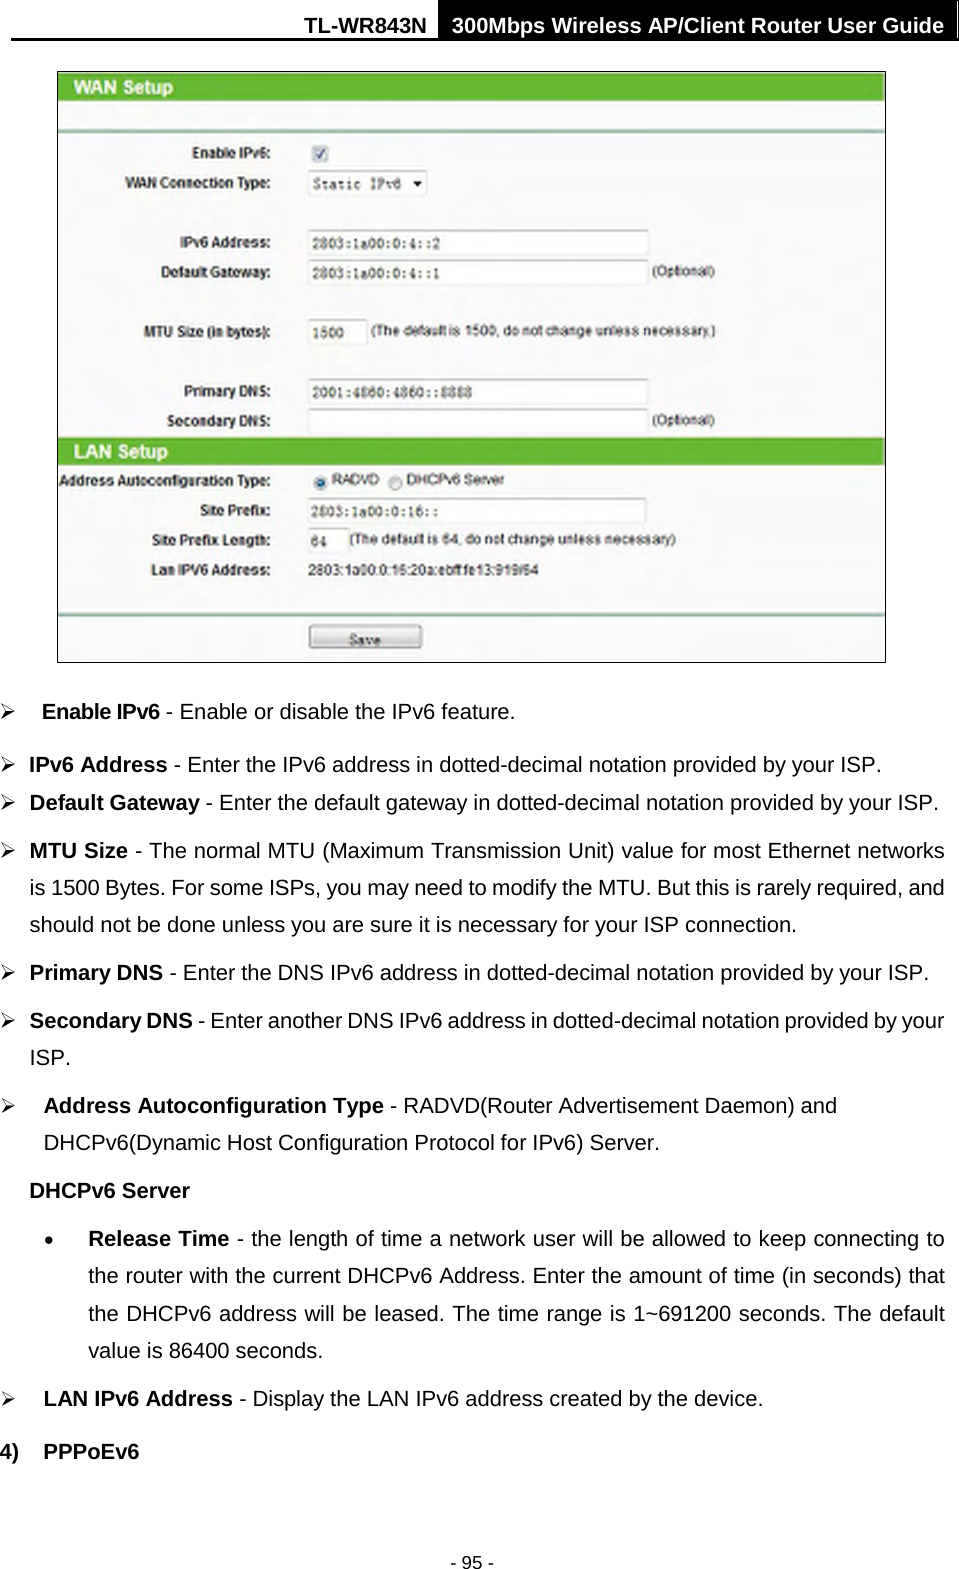 TL-WR843N 300Mbps Wireless AP/Client Router User Guide - 95 - Enable IPv6 - Enable or disable the IPv6 feature.IPv6 Address - Enter the IPv6 address in dotted-decimal notation provided by your ISP.Default Gateway - Enter the default gateway in dotted-decimal notation provided by your ISP.MTU Size - The normal MTU (Maximum Transmission Unit) value for most Ethernet networksis 1500 Bytes. For some ISPs, you may need to modify the MTU. But this is rarely required, andshould not be done unless you are sure it is necessary for your ISP connection.Primary DNS - Enter the DNS IPv6 address in dotted-decimal notation provided by your ISP.Secondary DNS - Enter another DNS IPv6 address in dotted-decimal notation provided by yourISP.Address Autoconfiguration Type - RADVD(Router Advertisement Daemon) andDHCPv6(Dynamic Host Configuration Protocol for IPv6) Server.DHCPv6 Server •Release Time - the length of time a network user will be allowed to keep connecting tothe router with the current DHCPv6 Address. Enter the amount of time (in seconds) thatthe DHCPv6 address will be leased. The time range is 1~691200 seconds. The defaultvalue is 86400 seconds.LAN IPv6 Address - Display the LAN IPv6 address created by the device.4) PPPoEv6